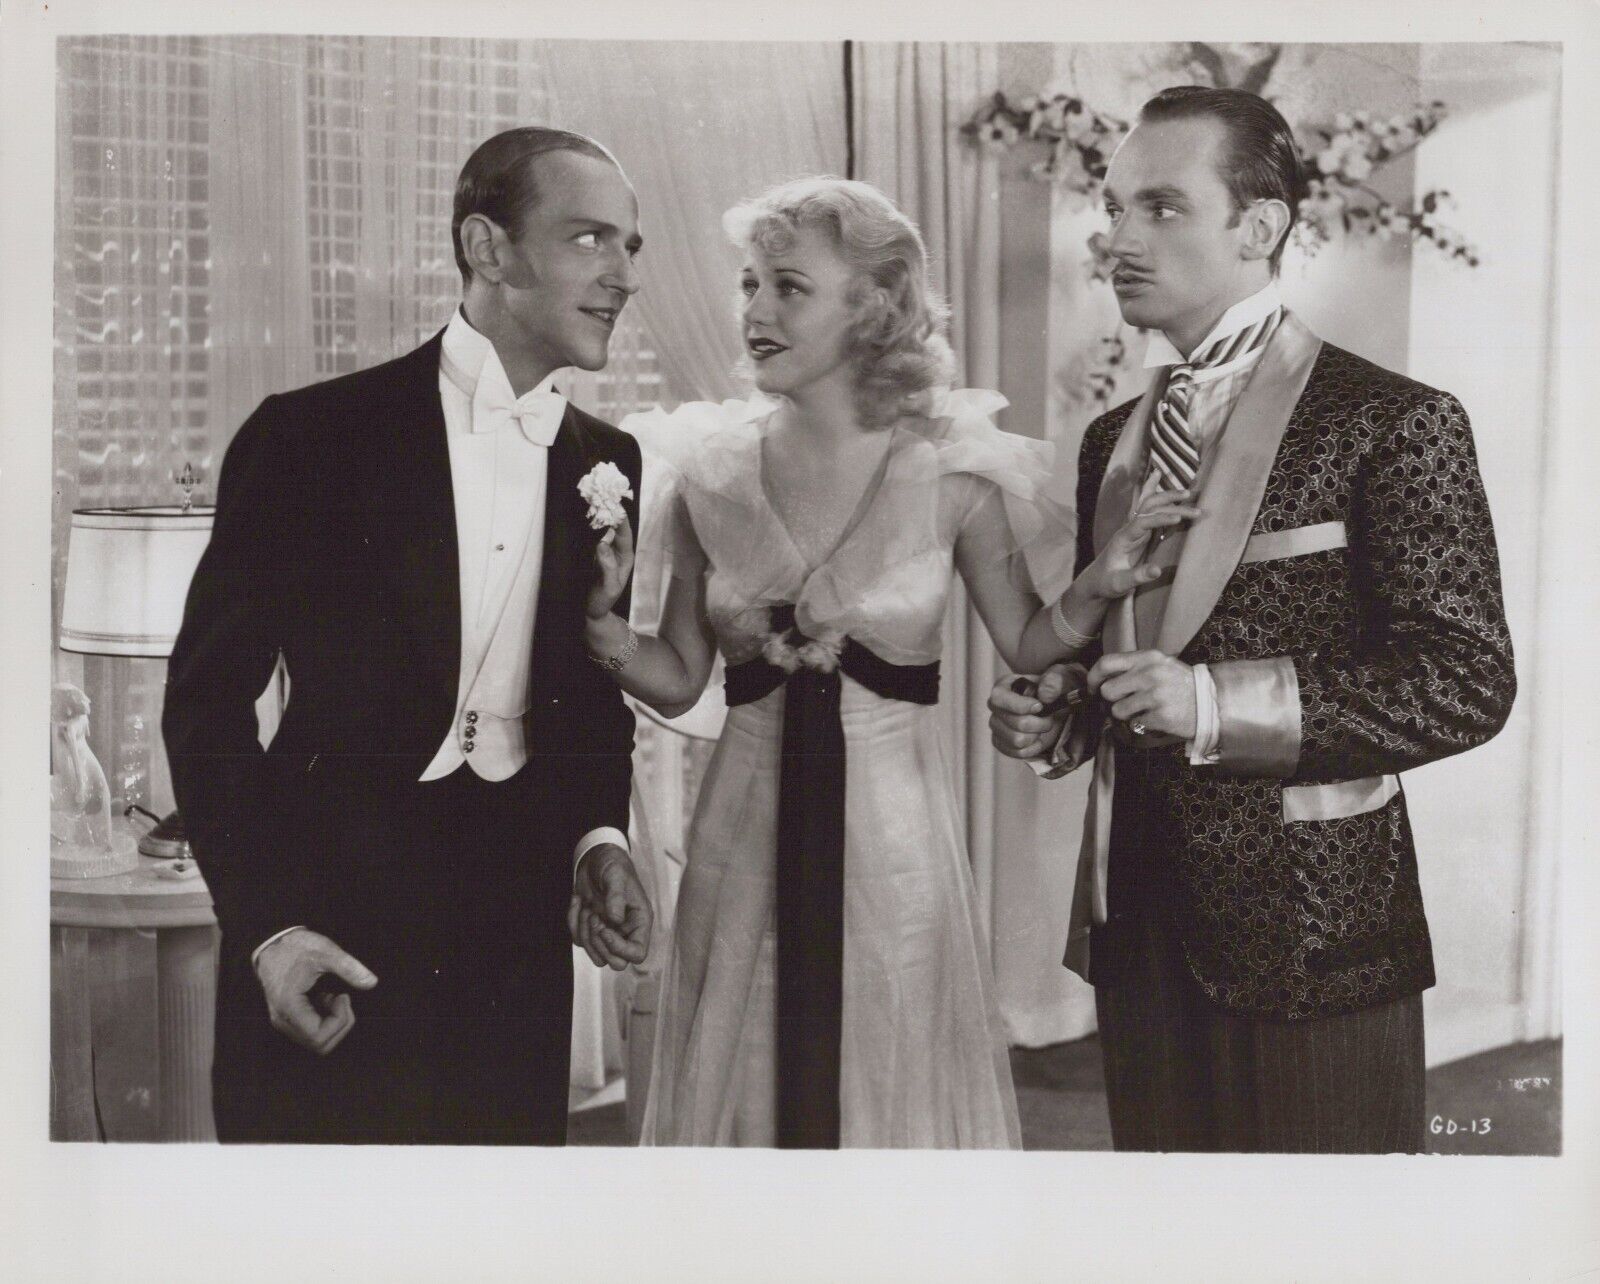 HOLLYWOOD BEAUTY GINGER ROGERS + FRED ASTAIRE STUNNING PORTRAIT 1950s Photo C46